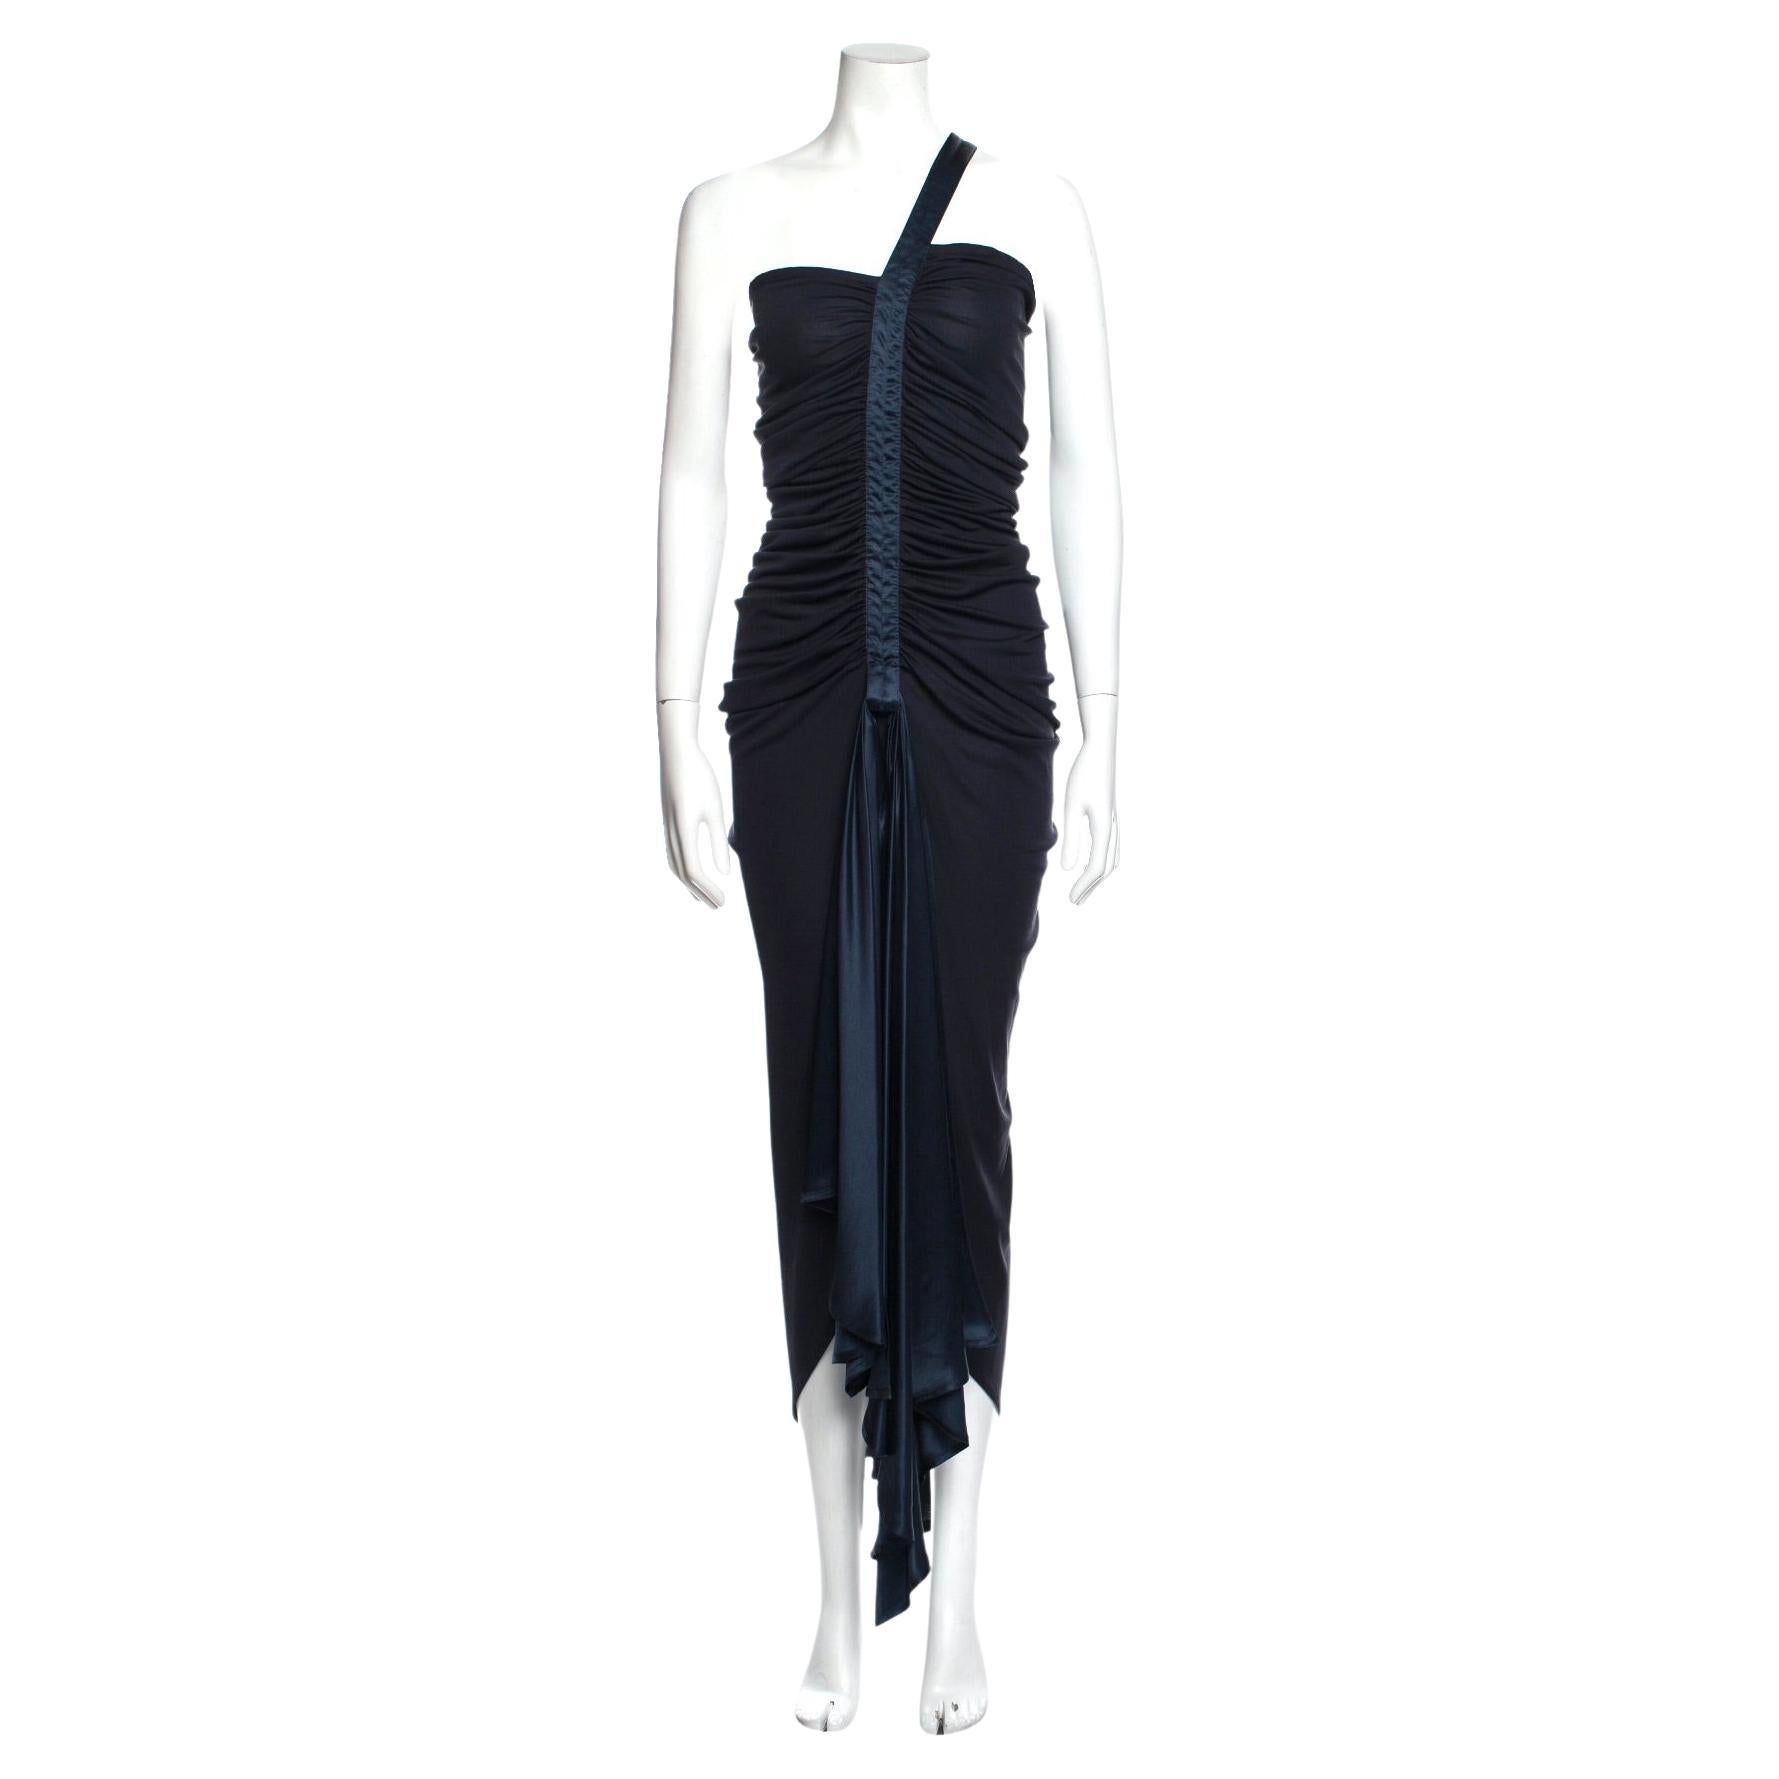 1980s Gianni Versace one shoulder navy evening gown